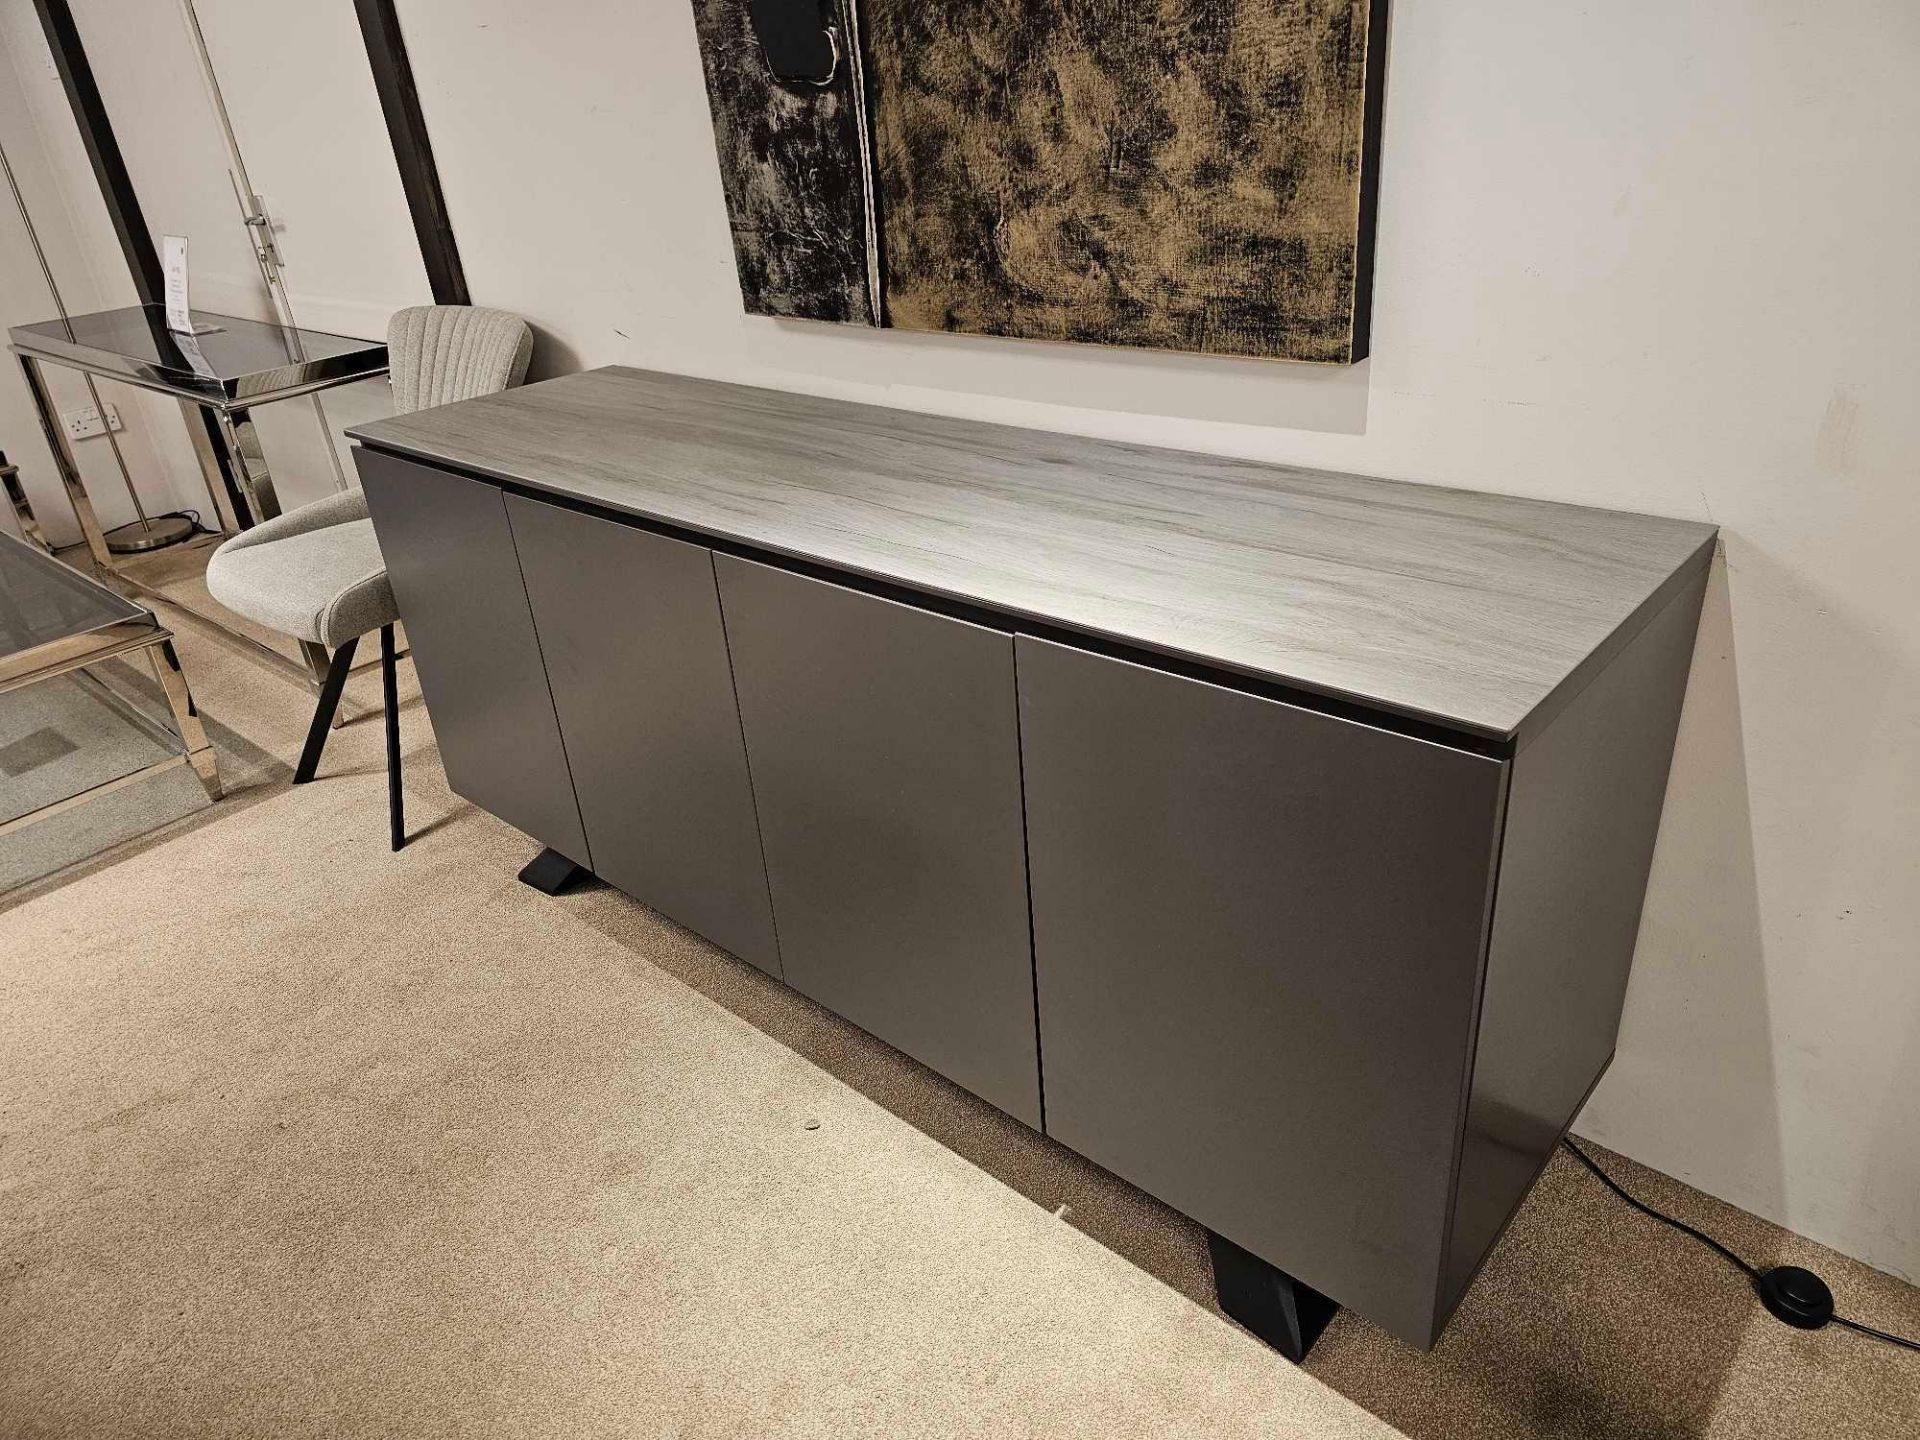 Spartan Sideboard by Kesterport The Spartan Four Door Sideboard provides is striking as a stand - Bild 8 aus 12